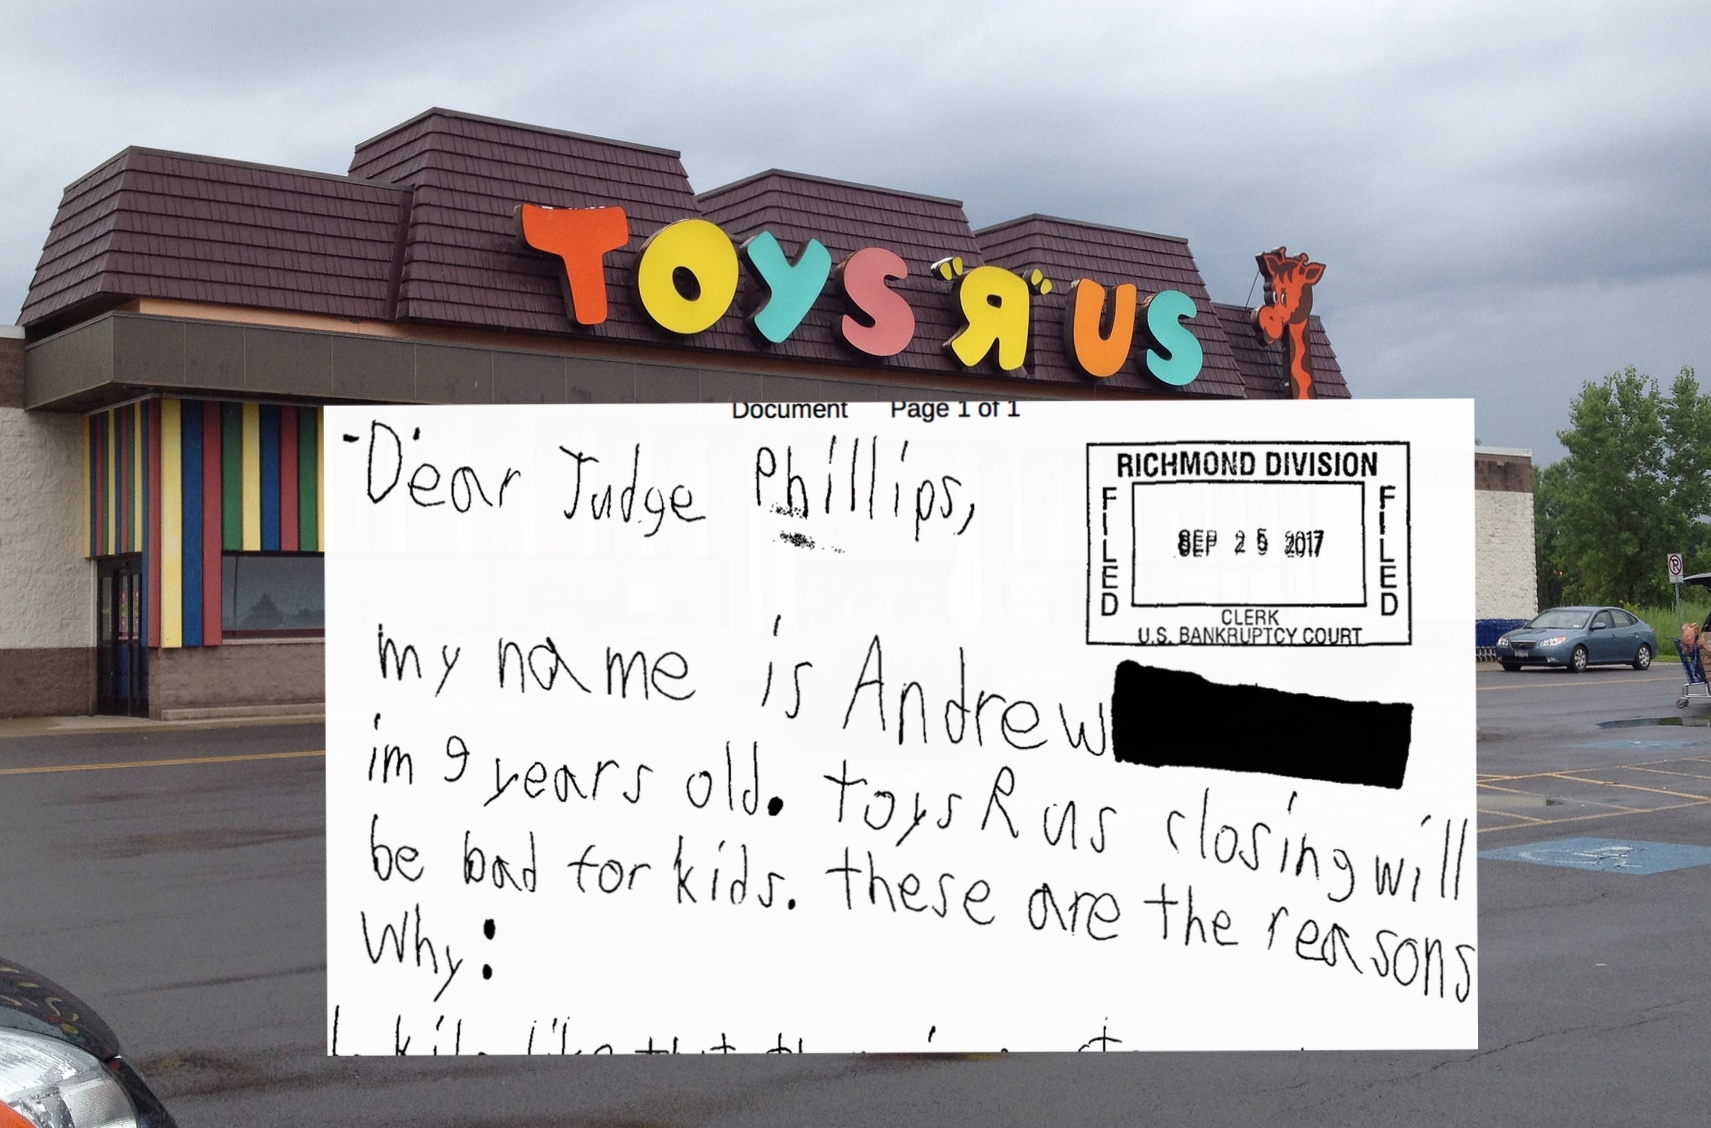 Child Makes Adorable Case In Favor Of Toys ‘R’ Us